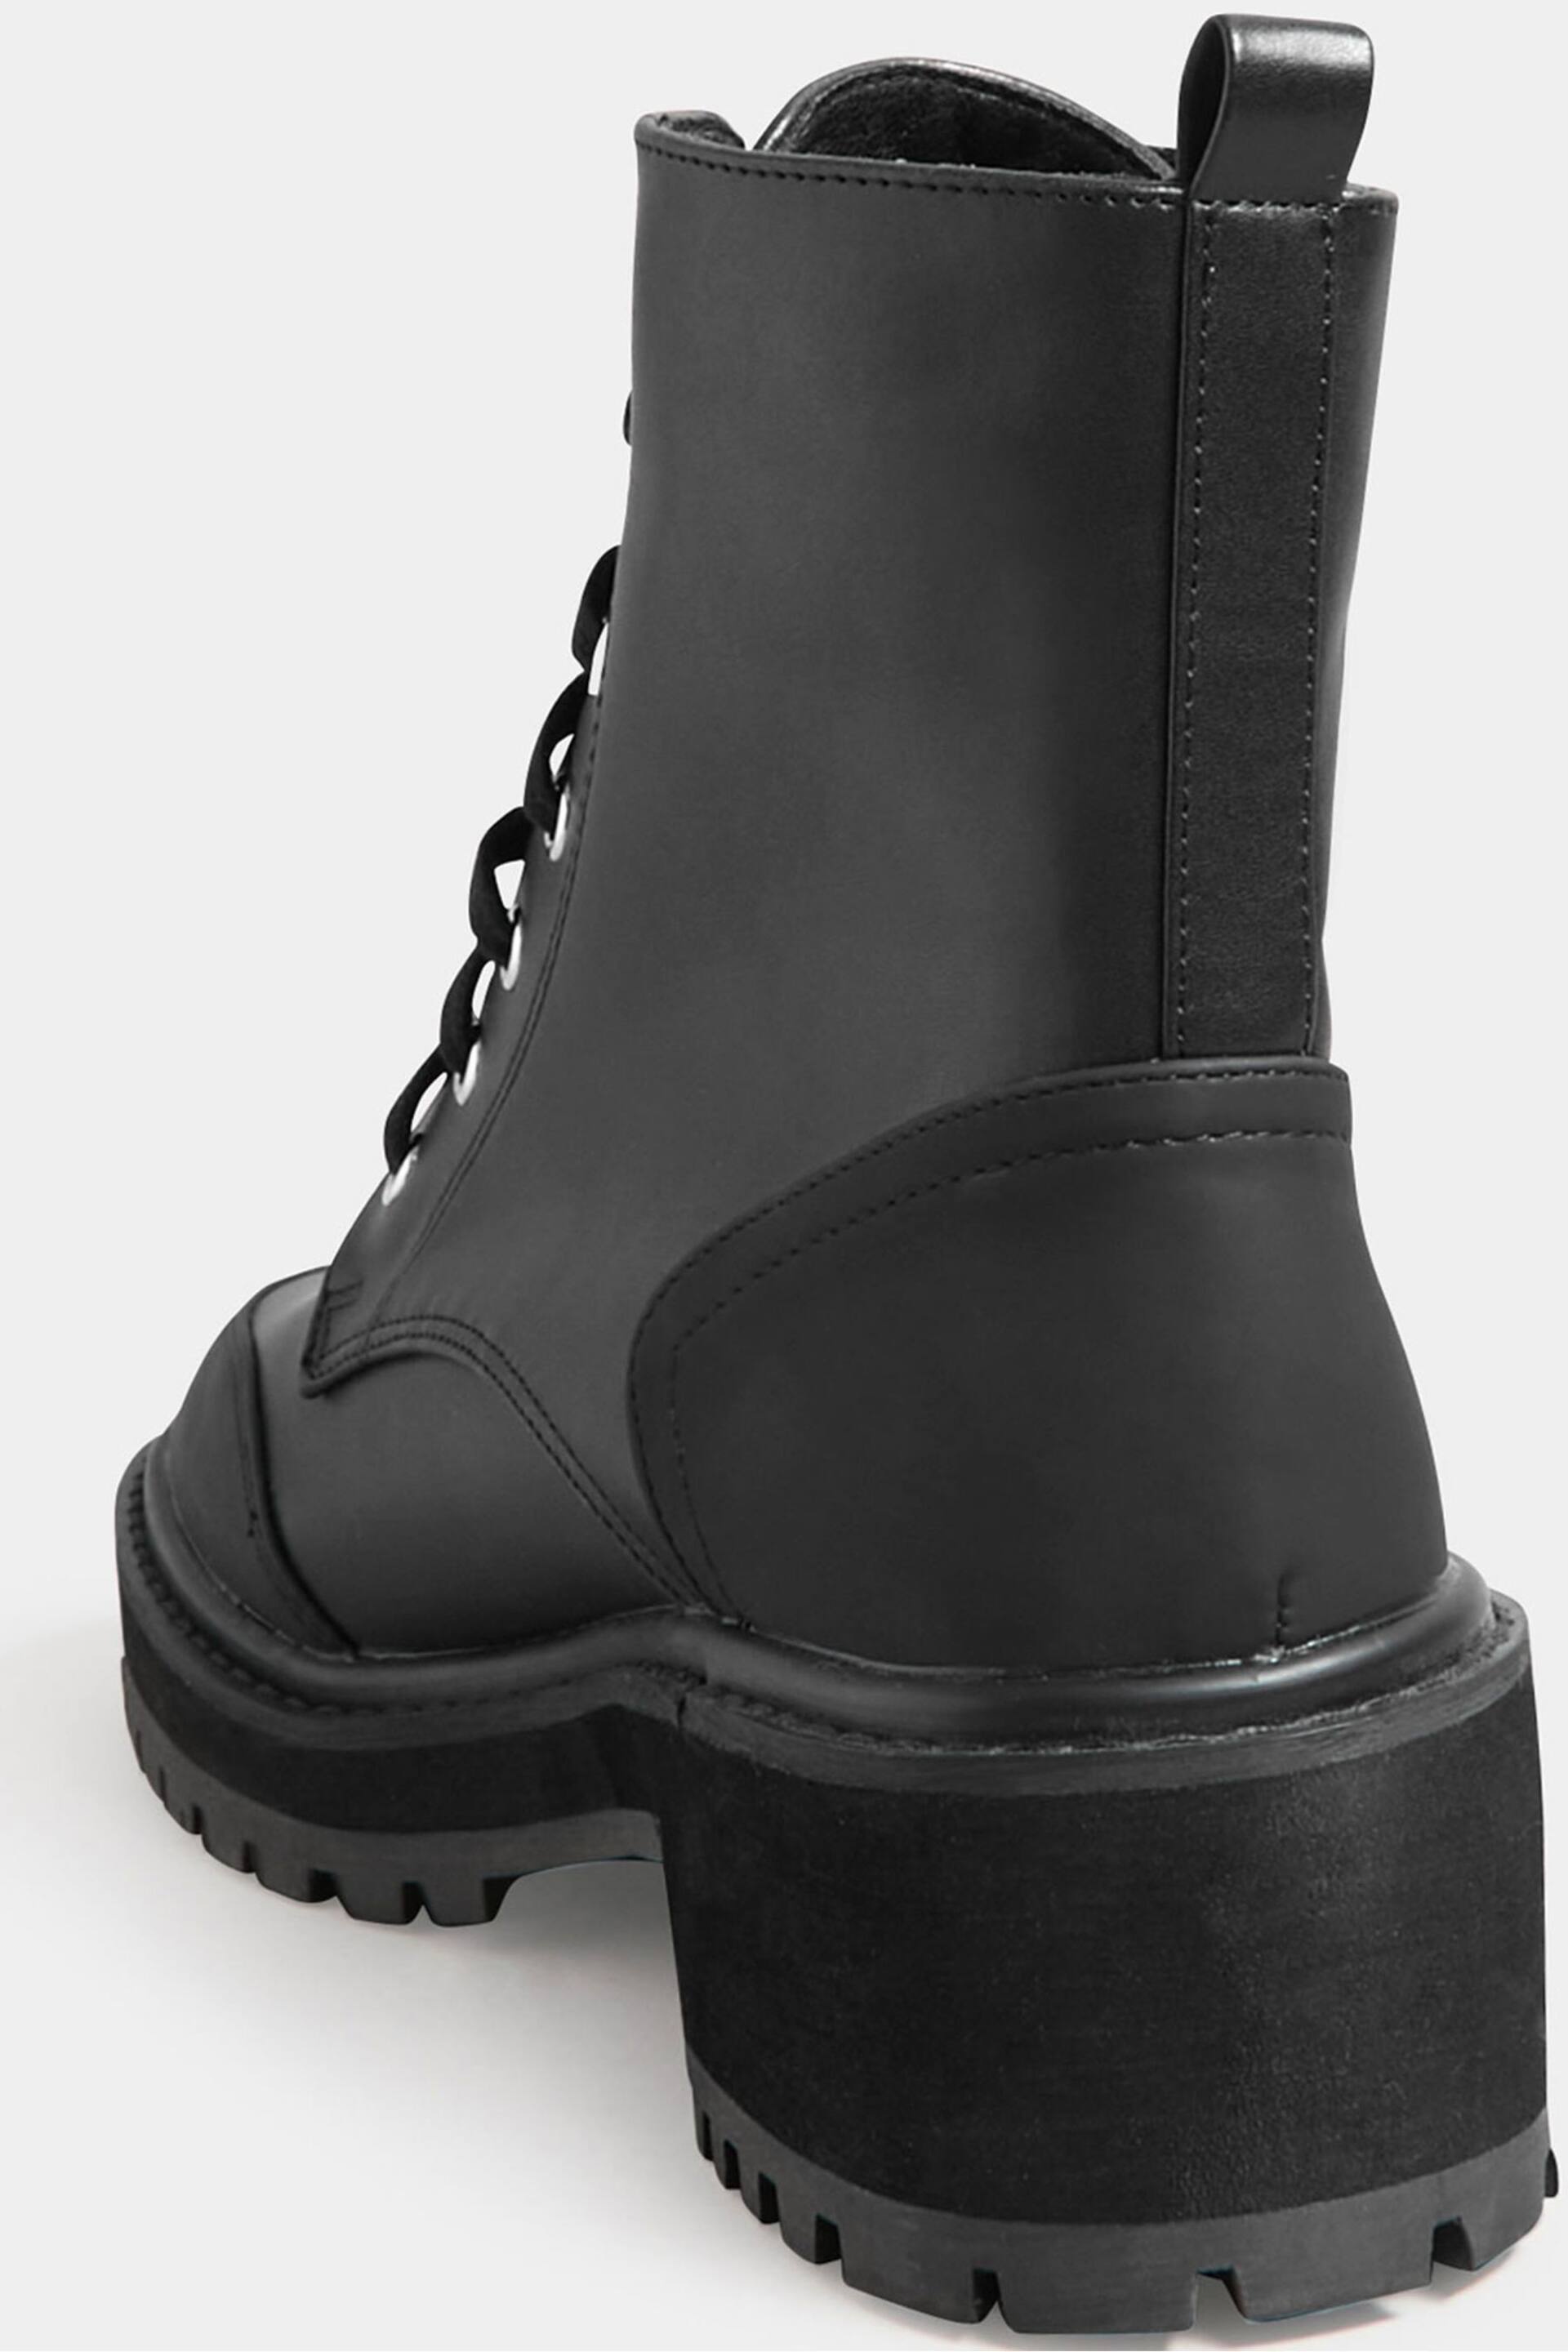 Long Tall Sally Black Chunky Lace Boots - Image 3 of 3